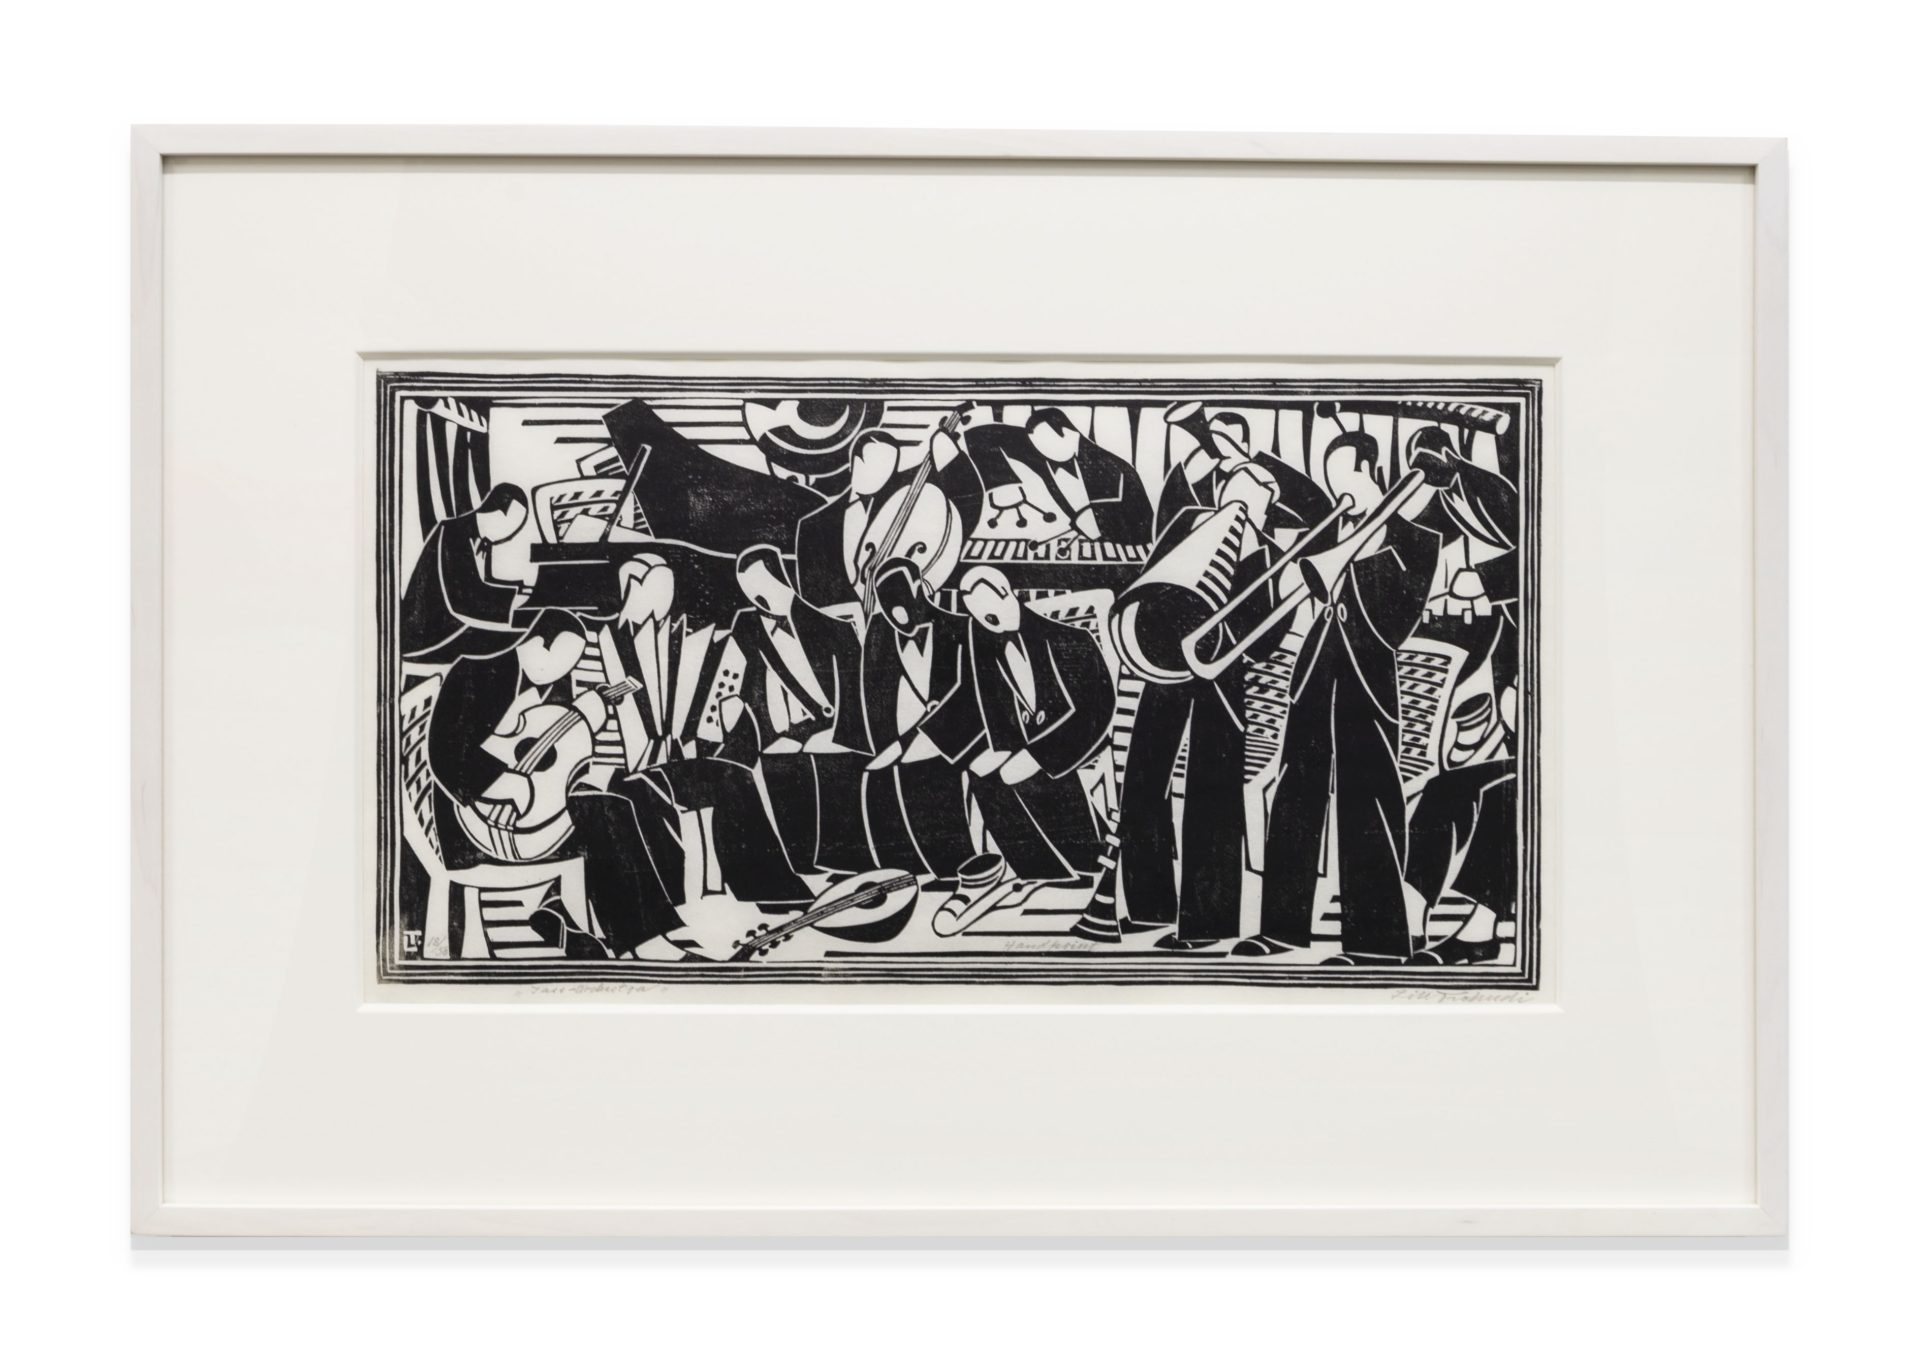 Lill Tschudi Jazz Orchestra, c. 1935 Linocut on Japon paper Image Dimensions: 10 5/8 x 20 3/8 inches (27 x 51.8 cm) Paper Dimensions: 12 x 24 1/2 inches (30.5 x 62.2 cm) Edition 18 of 50